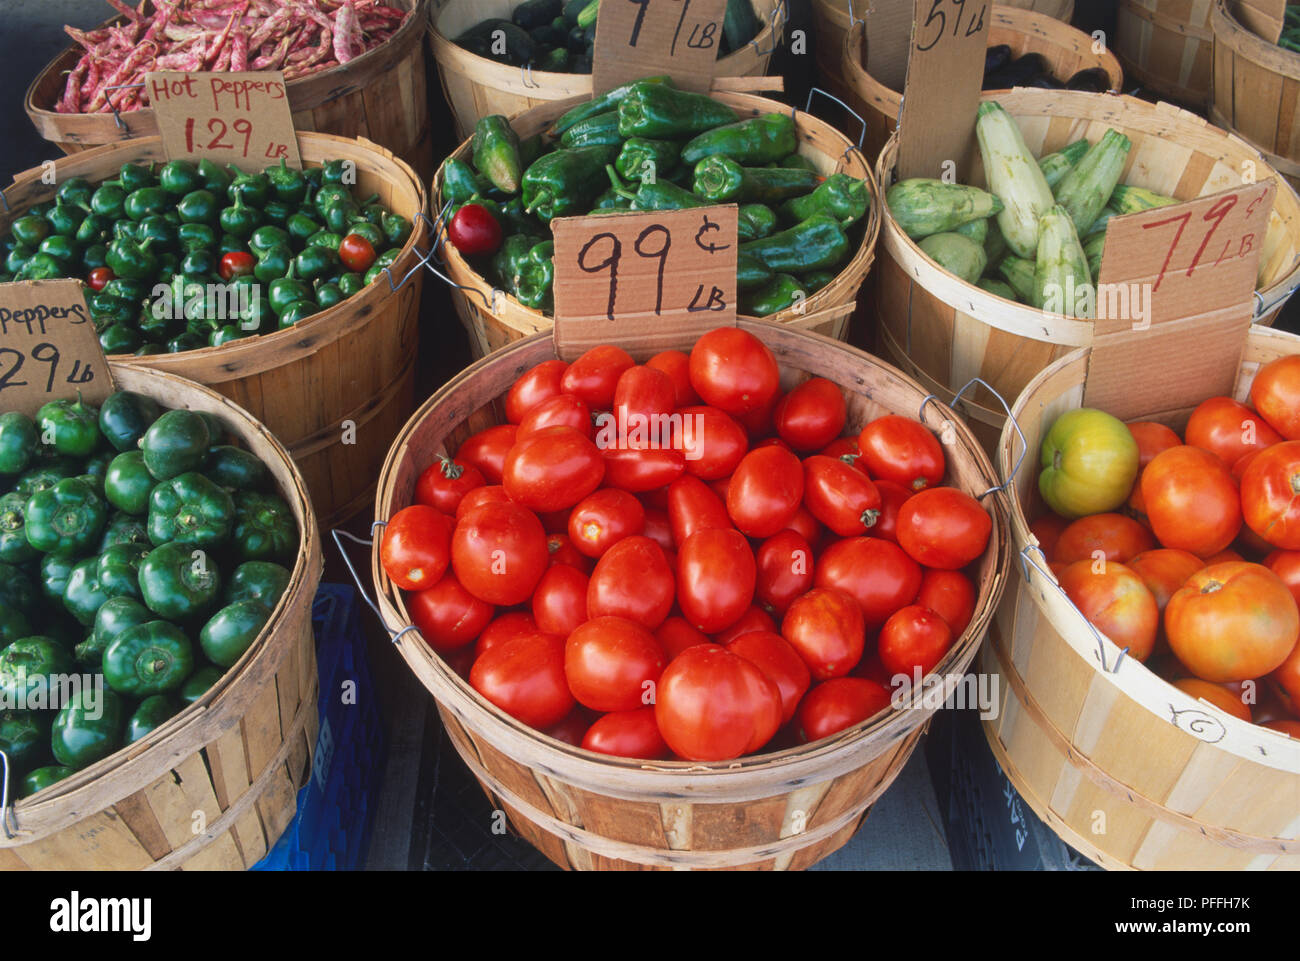 Canada, Ontario, Toronto, Little Italy, fresh vegetables, including tomatoes, green peppers and courgettes, on sale from wicker baskets, close up, high angle view. Stock Photo